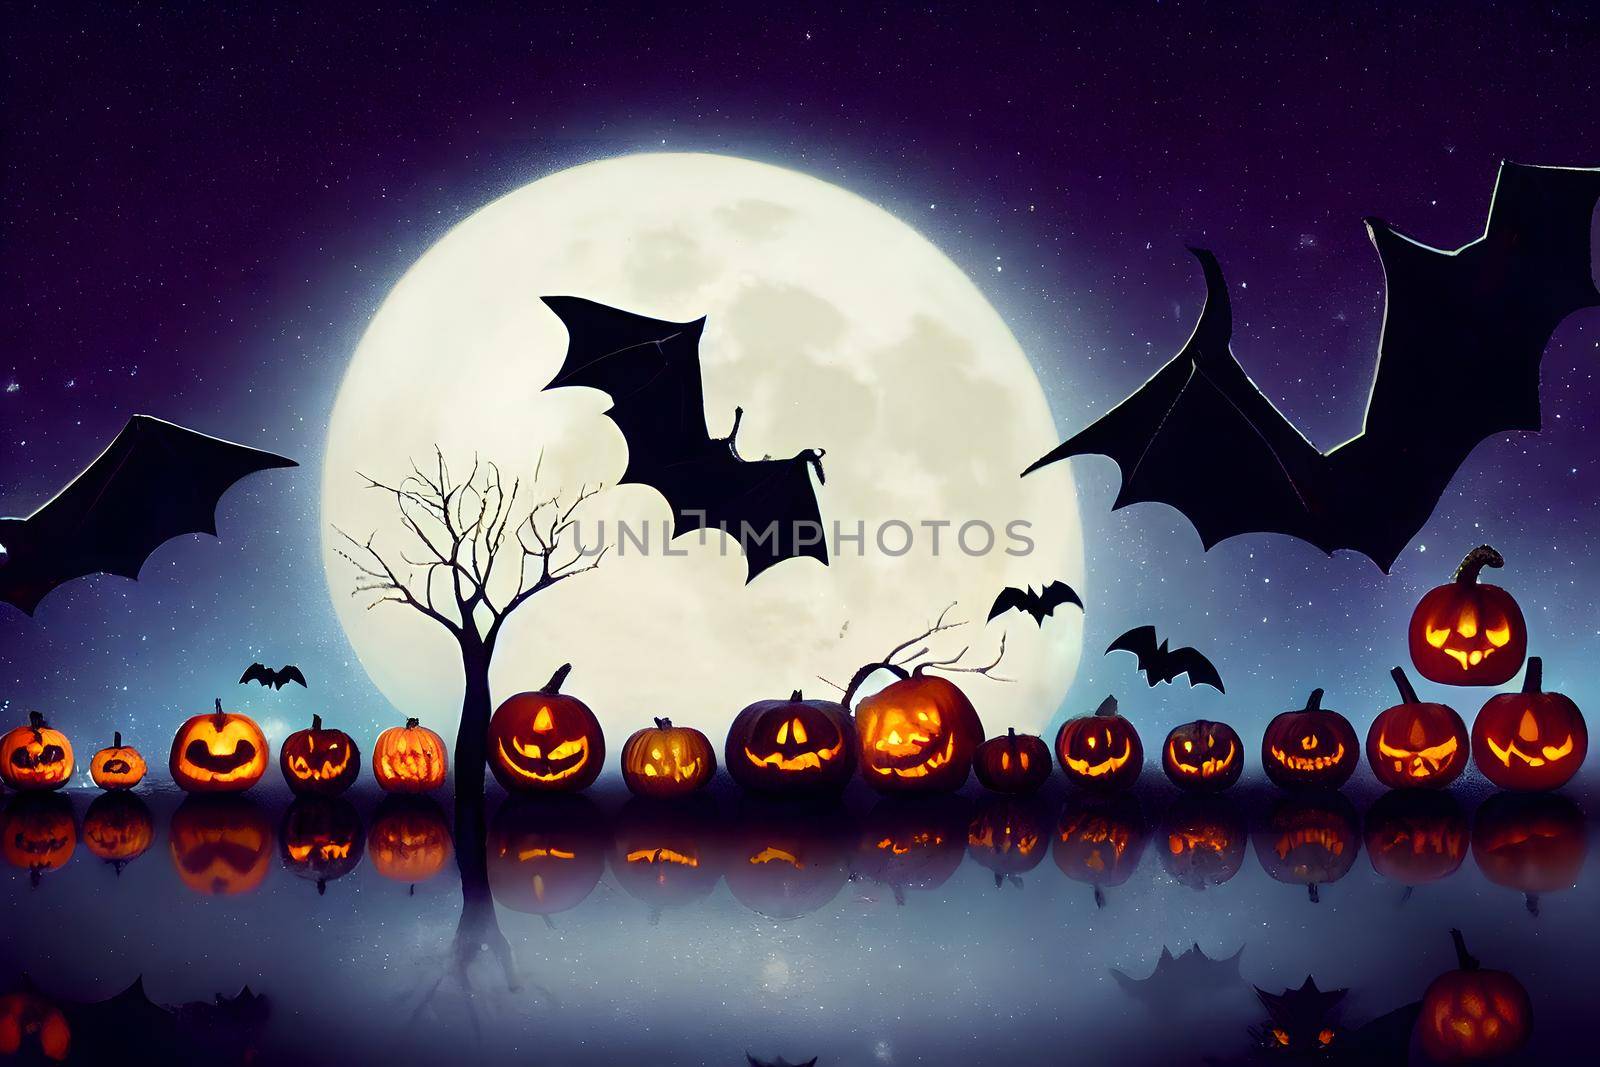 halloween aesthetic background, bats, pumpkins, reflections on water, large full moon and stars night, neural network generated art by z1b